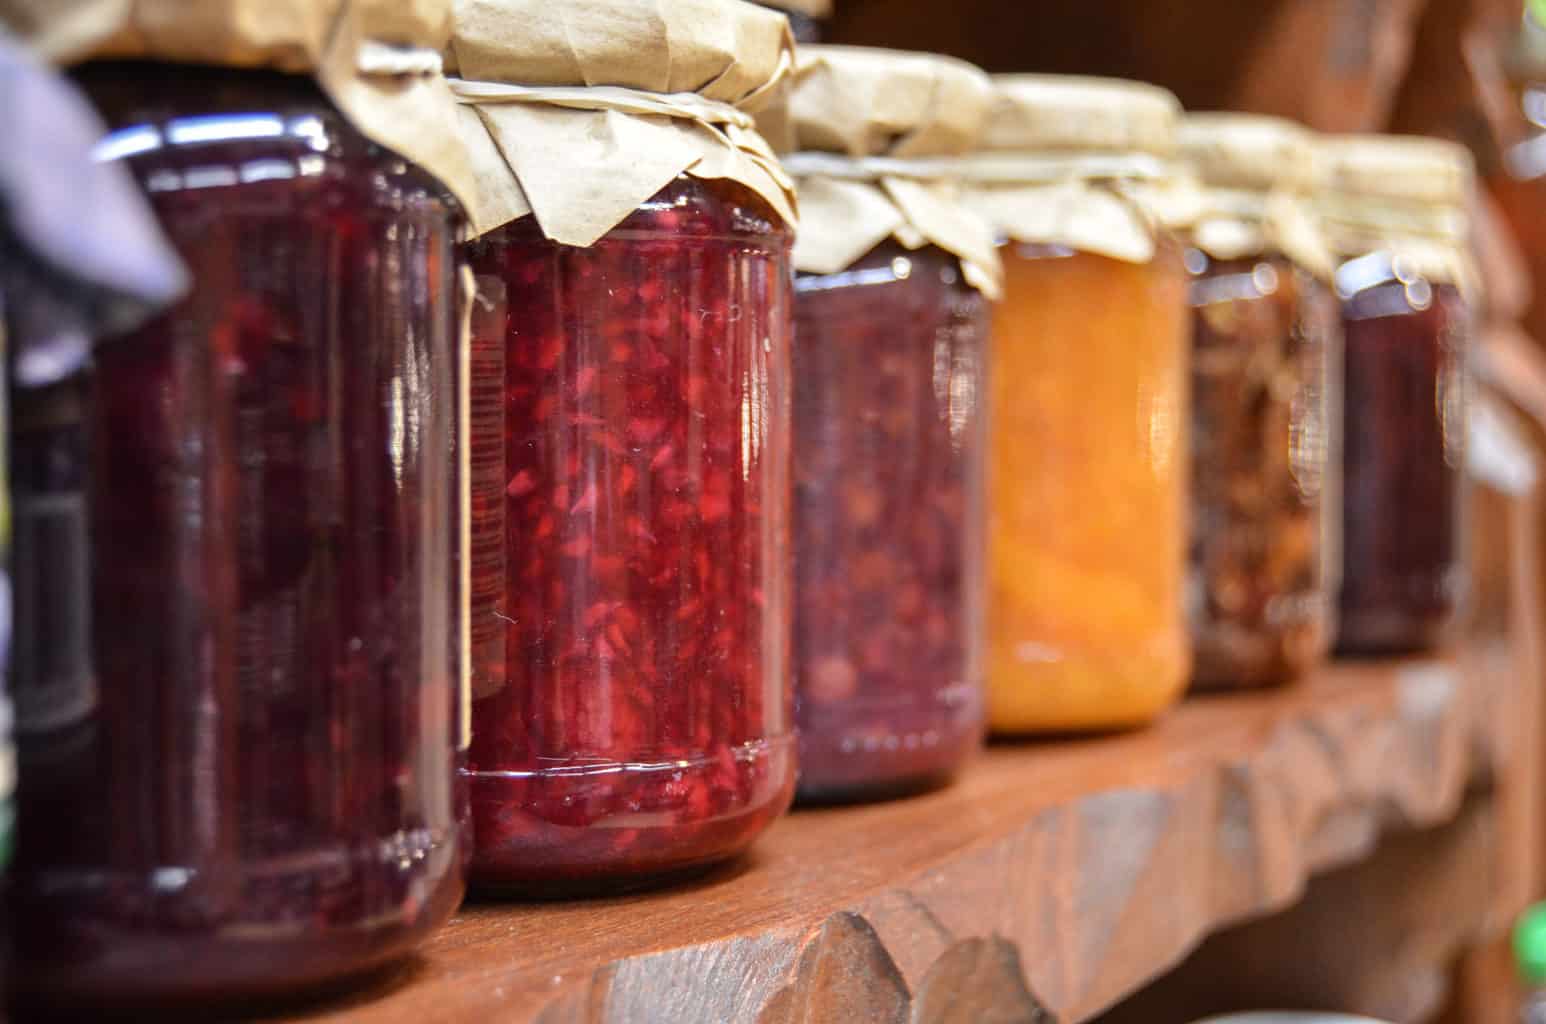 Canning as a way to preserve food long term